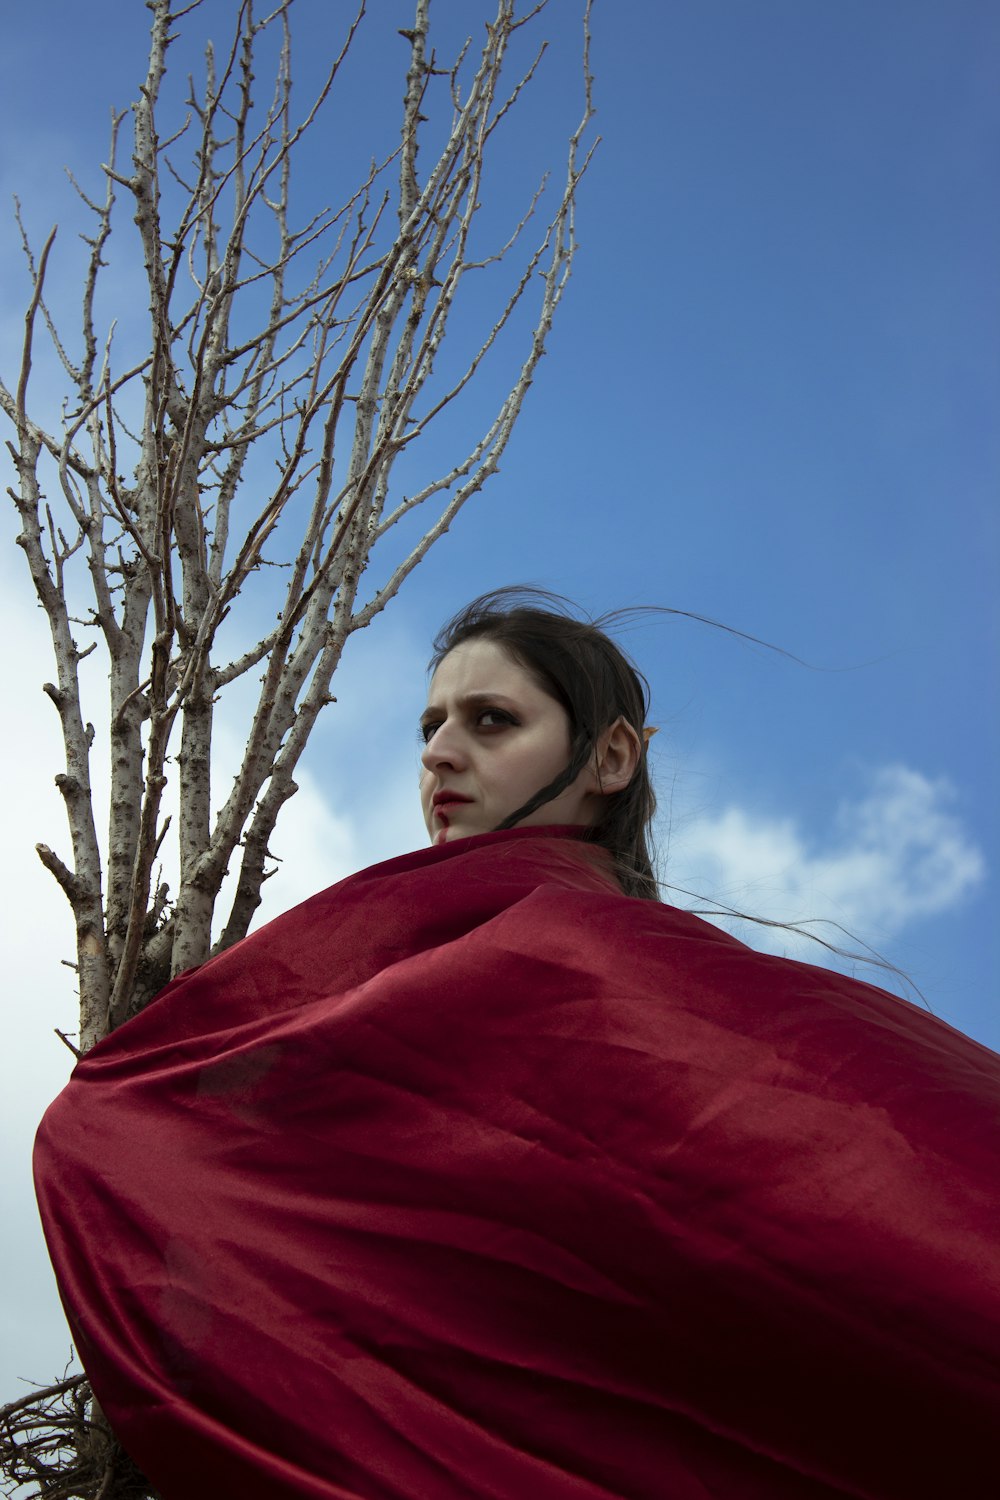 a woman wrapped in a red blanket standing next to a tree